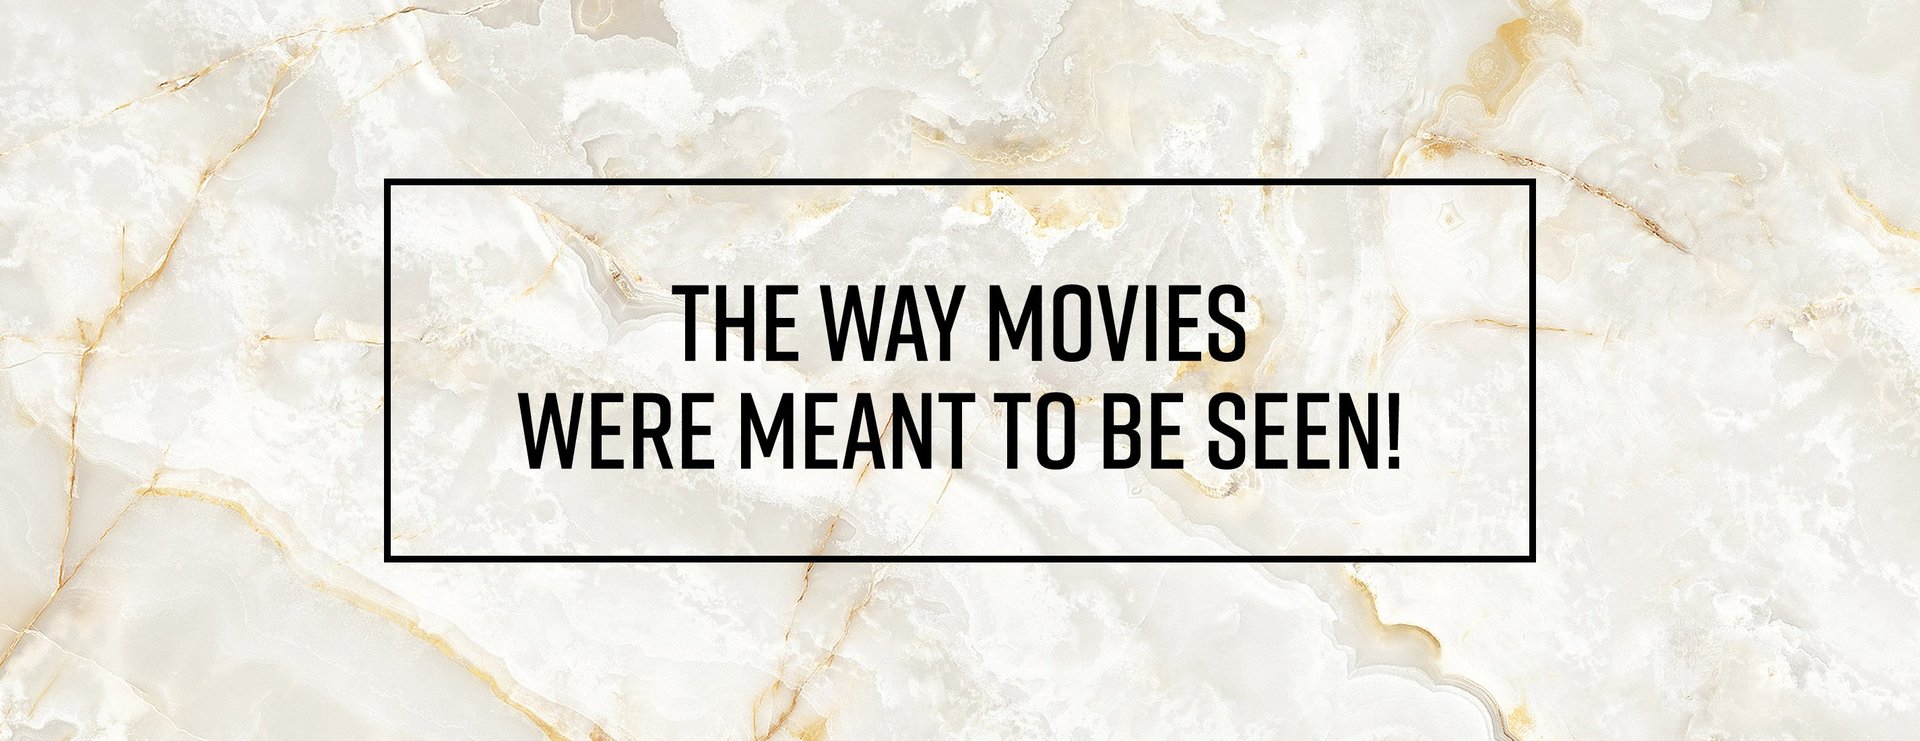 the way movies were meant to be seen logo